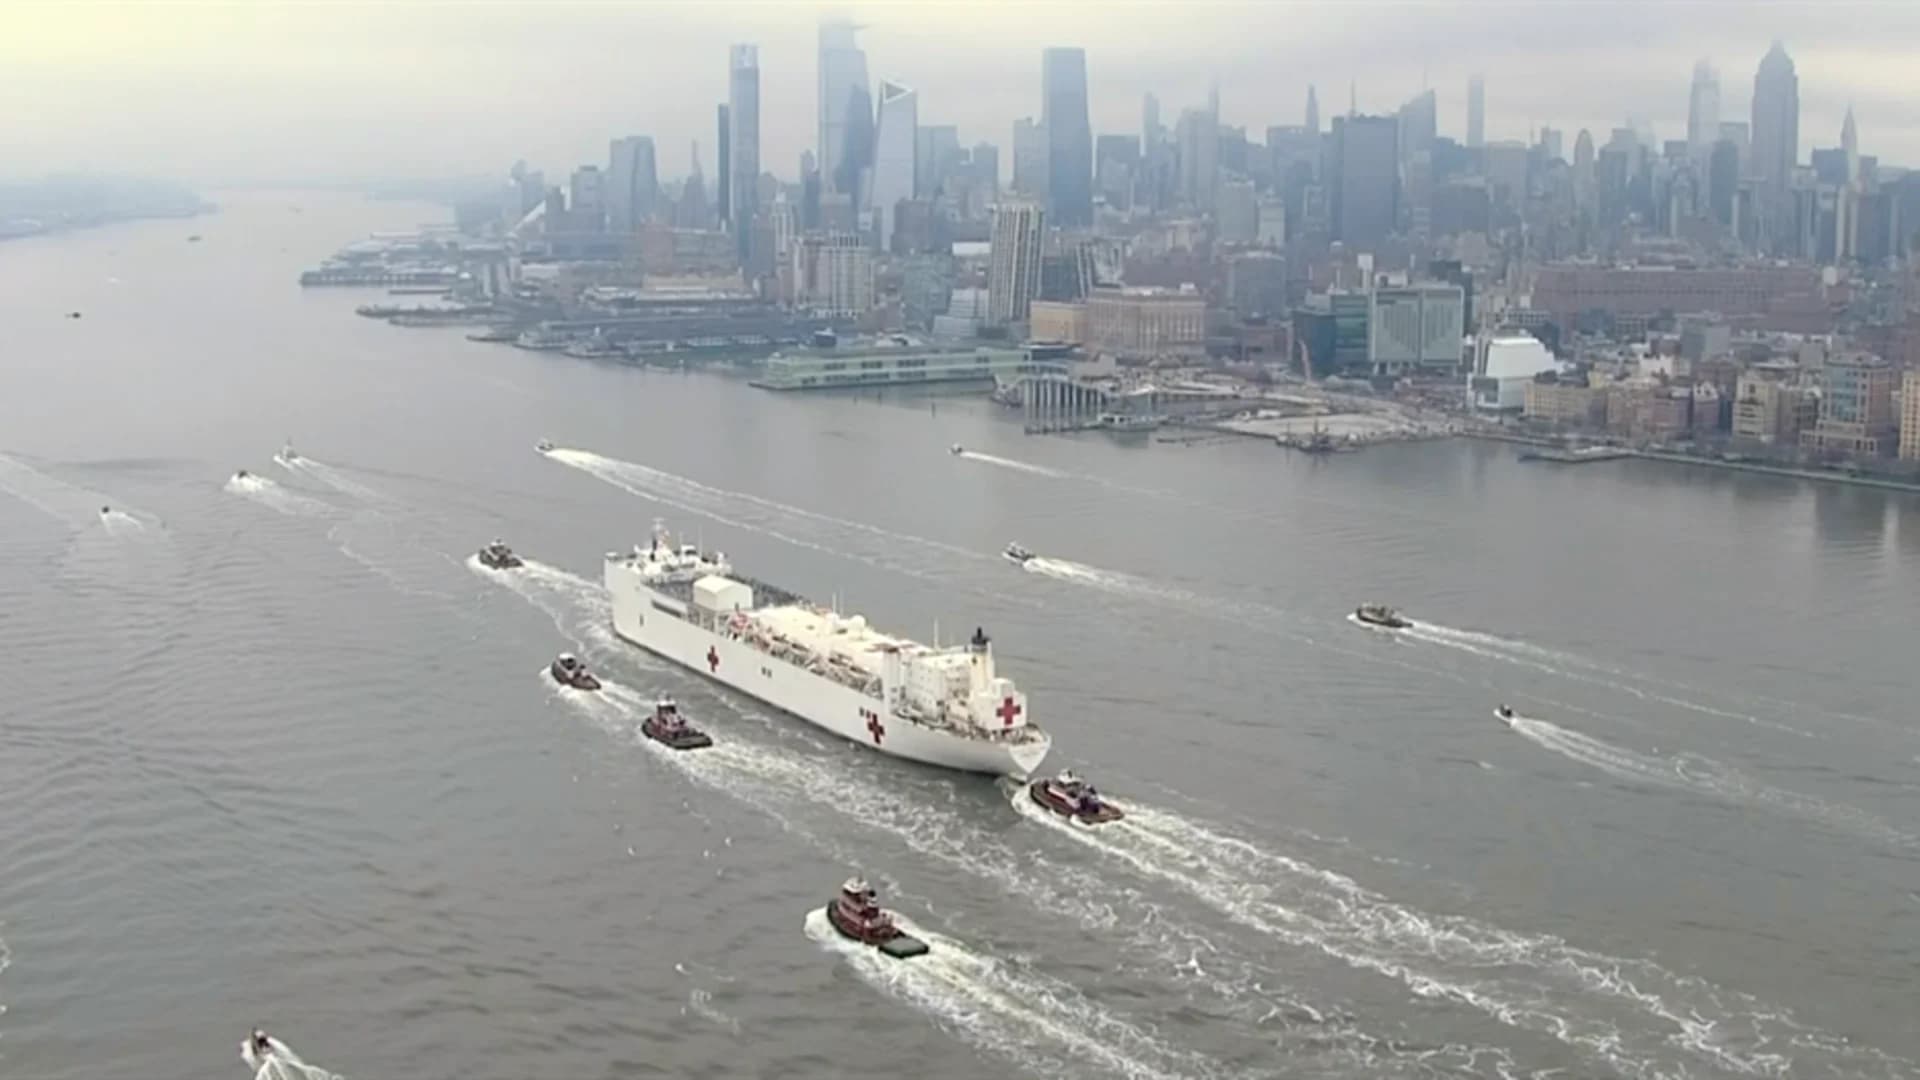 Chopper 12 above the arrival of USNS Comfort hospital ship in Manhattan